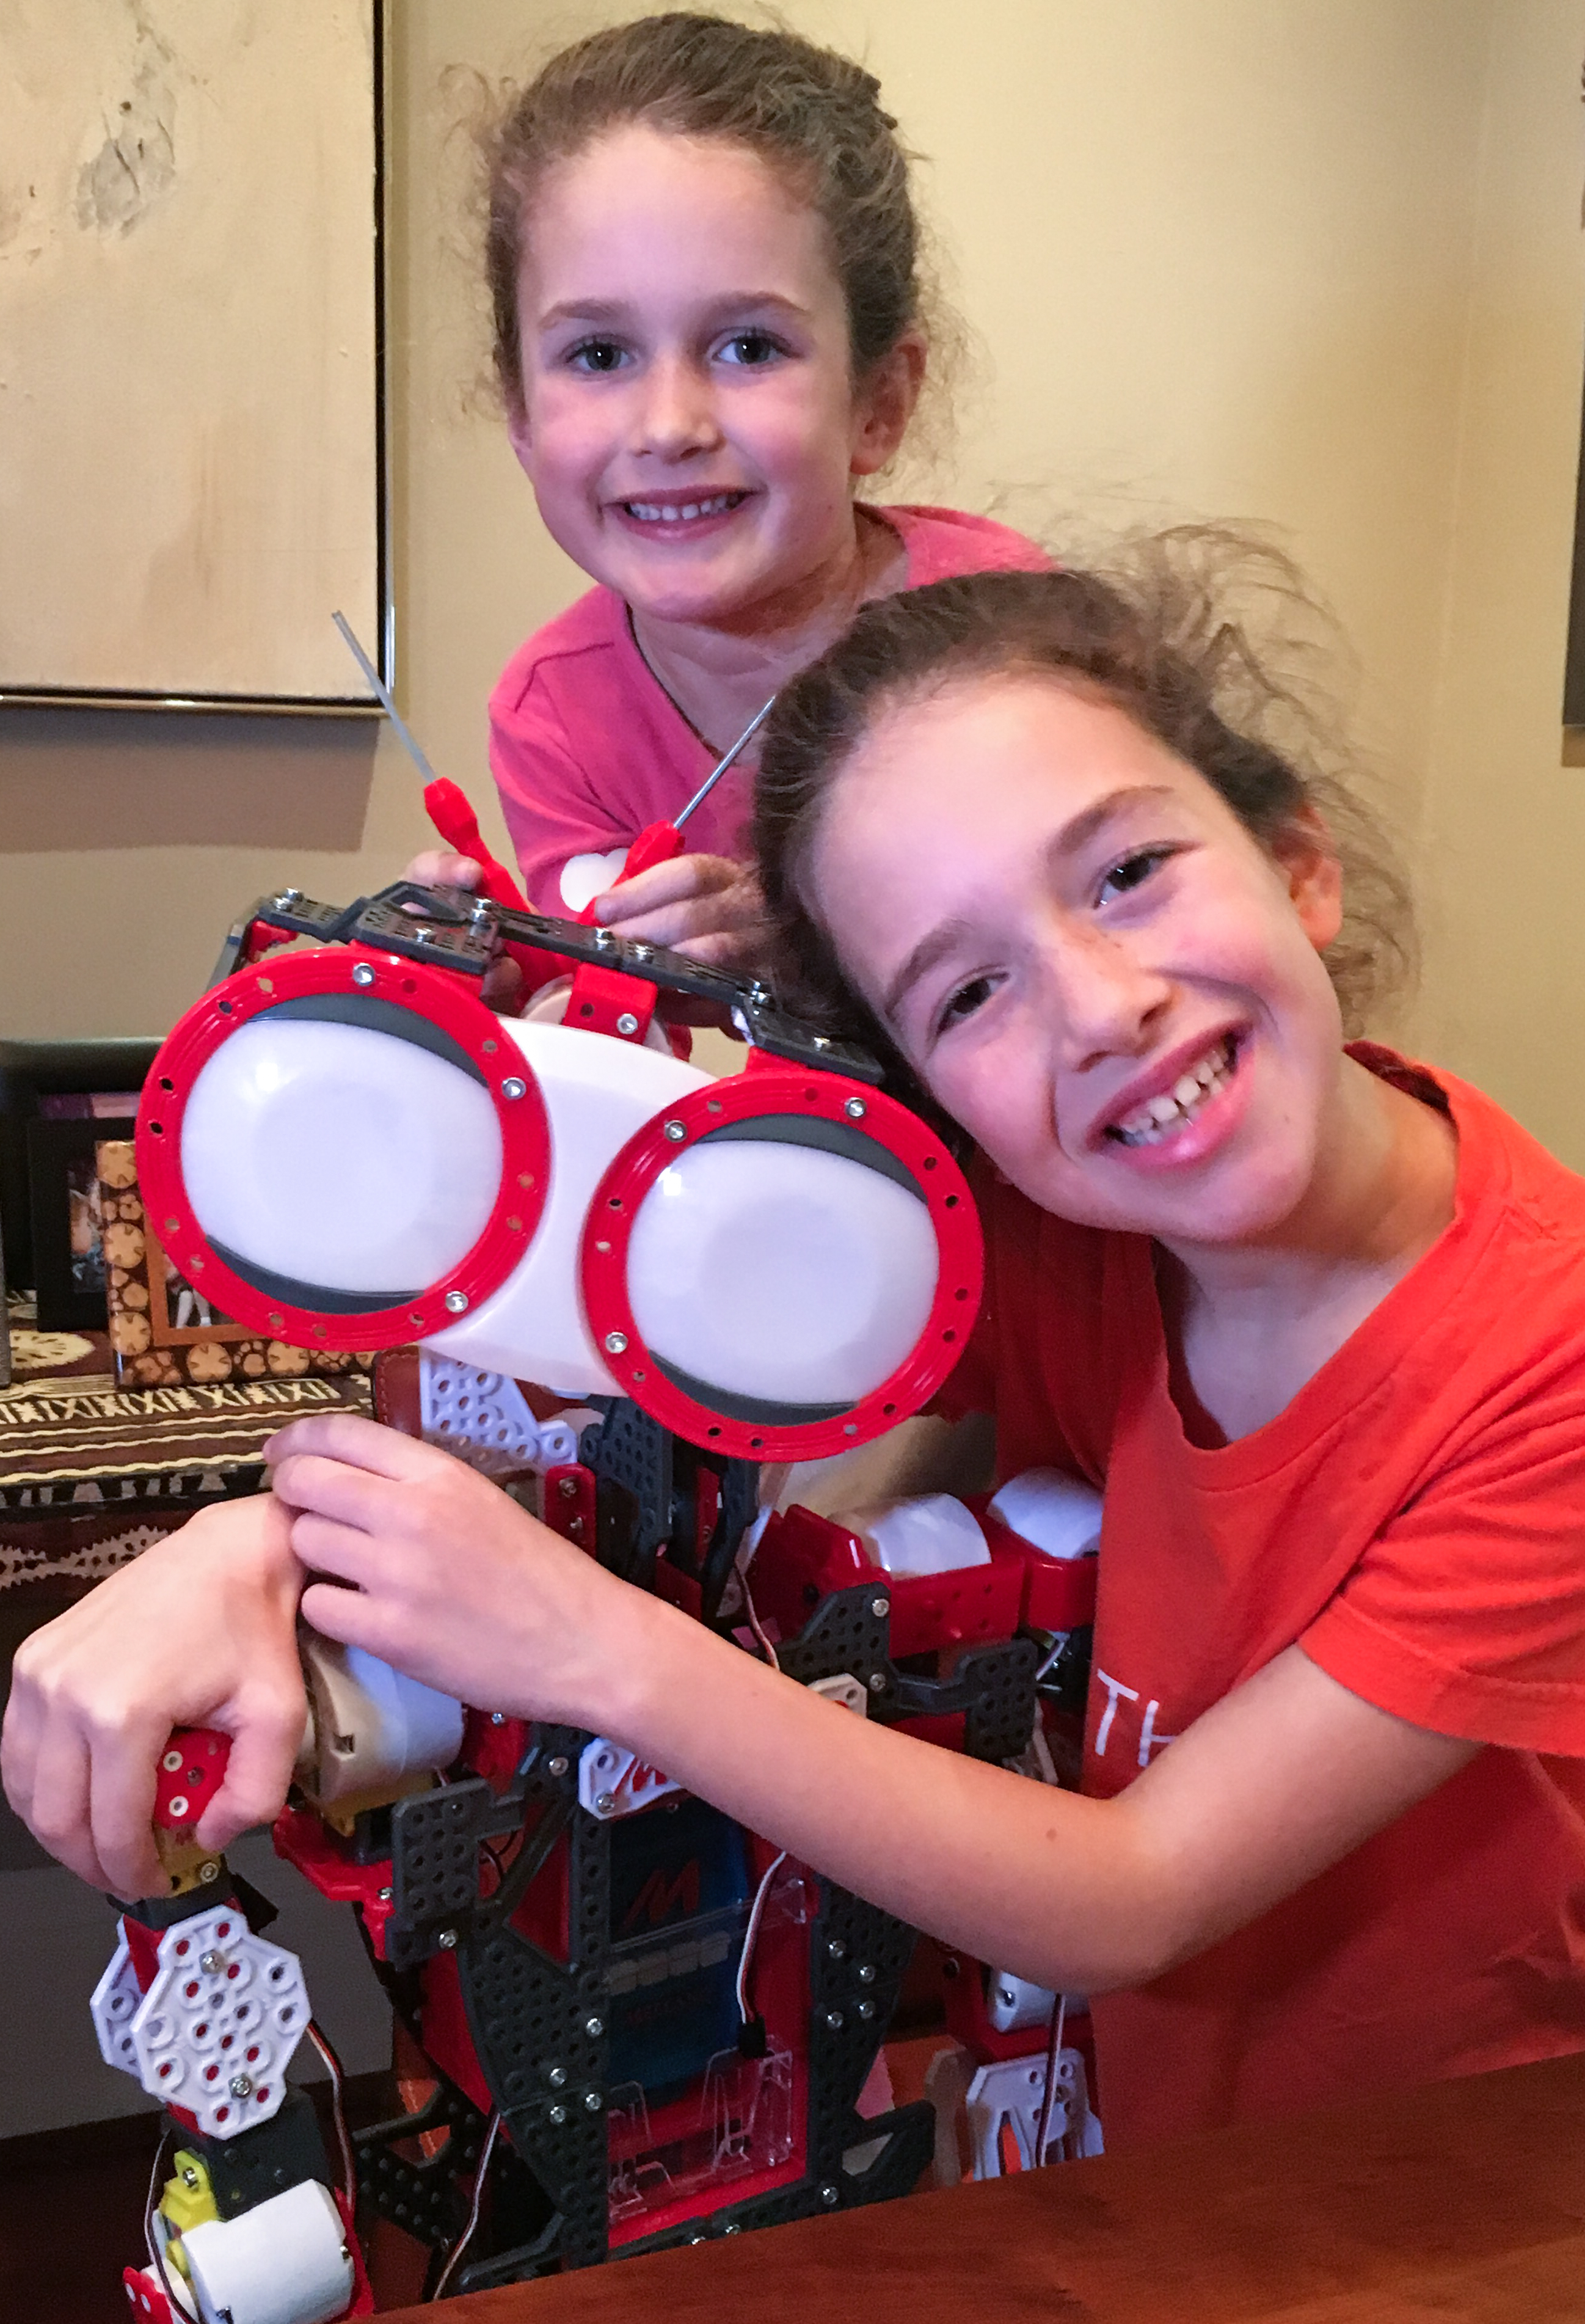 #RobotGirls: An Inspiration to Girls (and Boys) Everywhere!